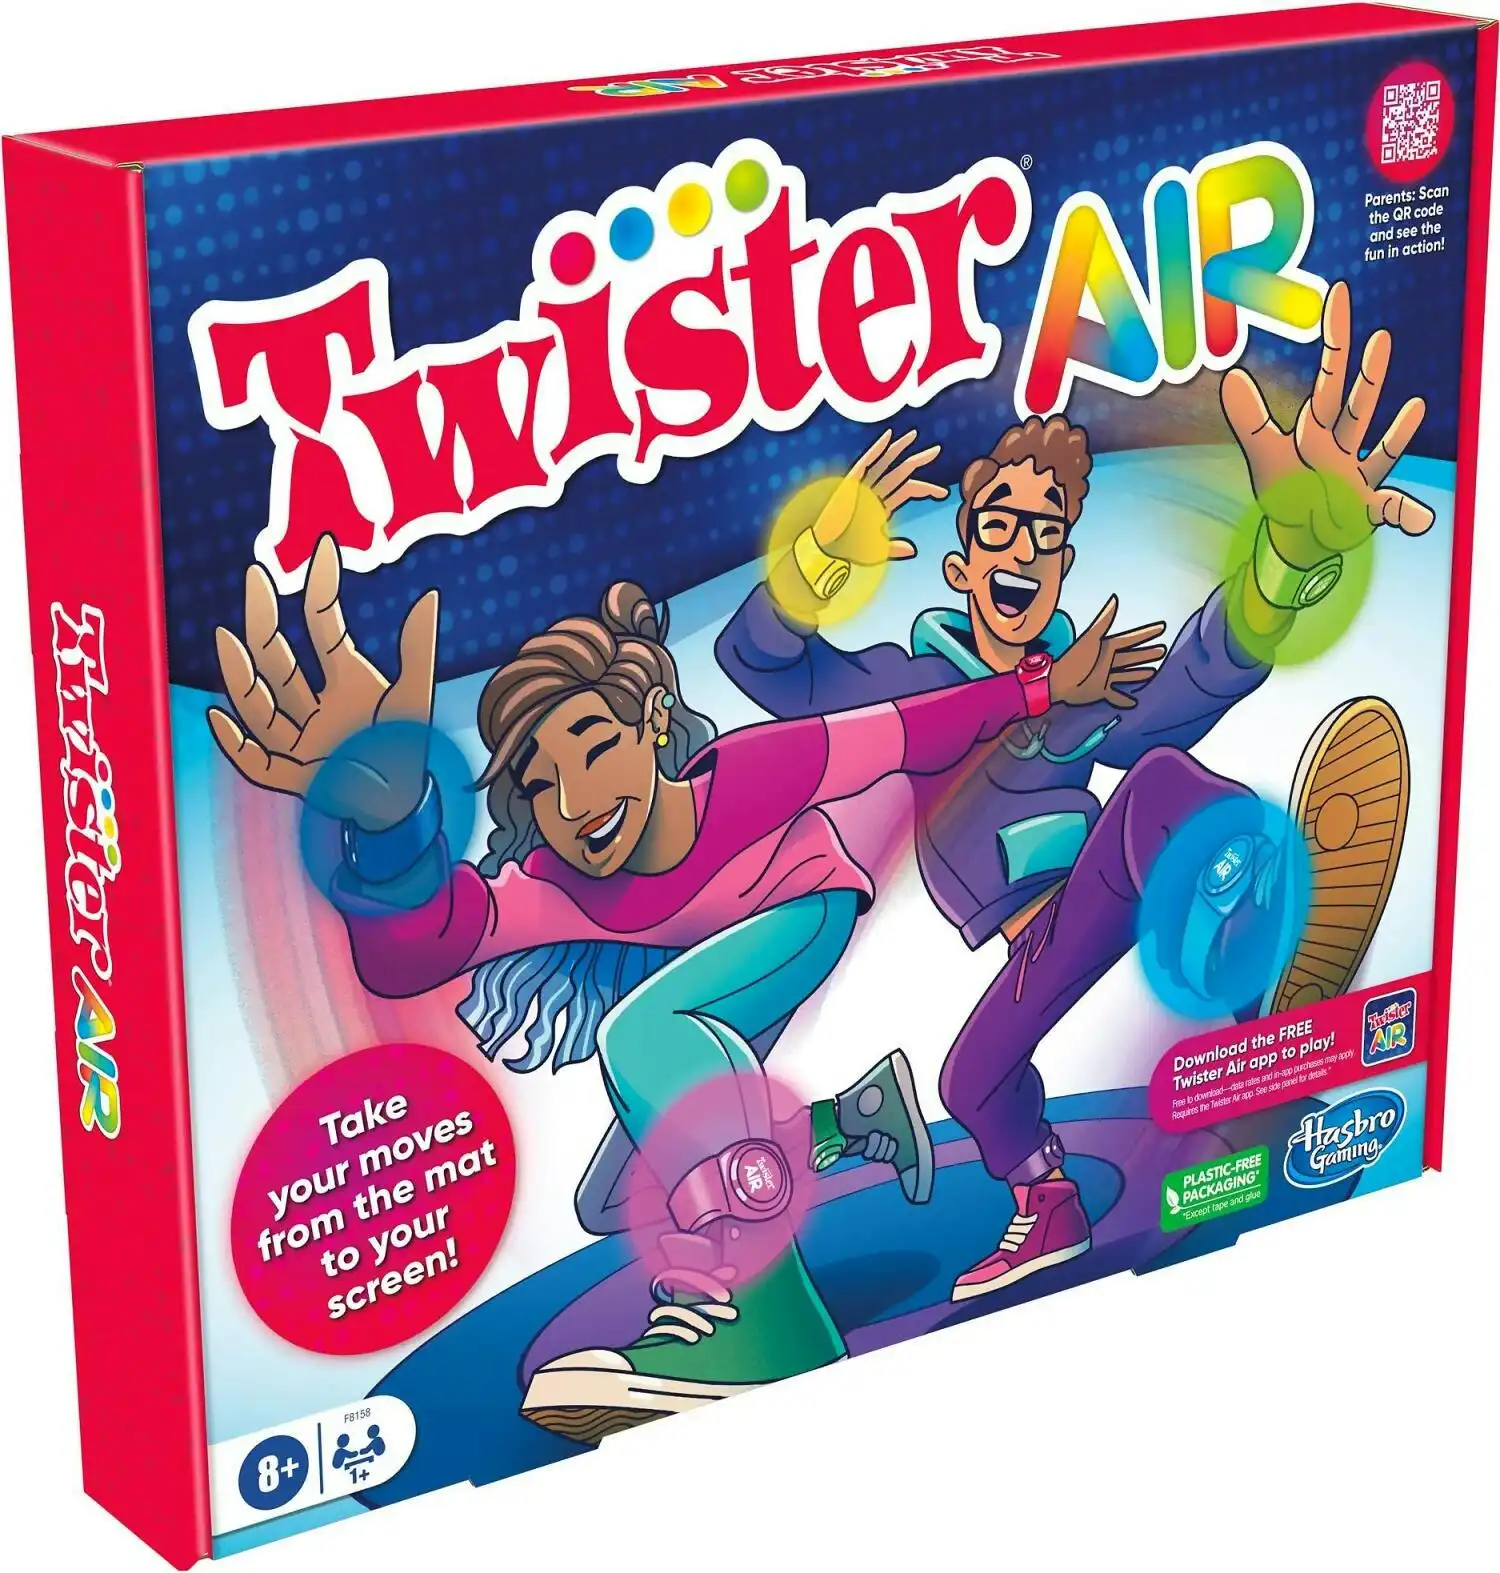 Hasbro - Twister Air Game Ar Twister App Play Game Links To Smart Devices Active Games Ages 8+